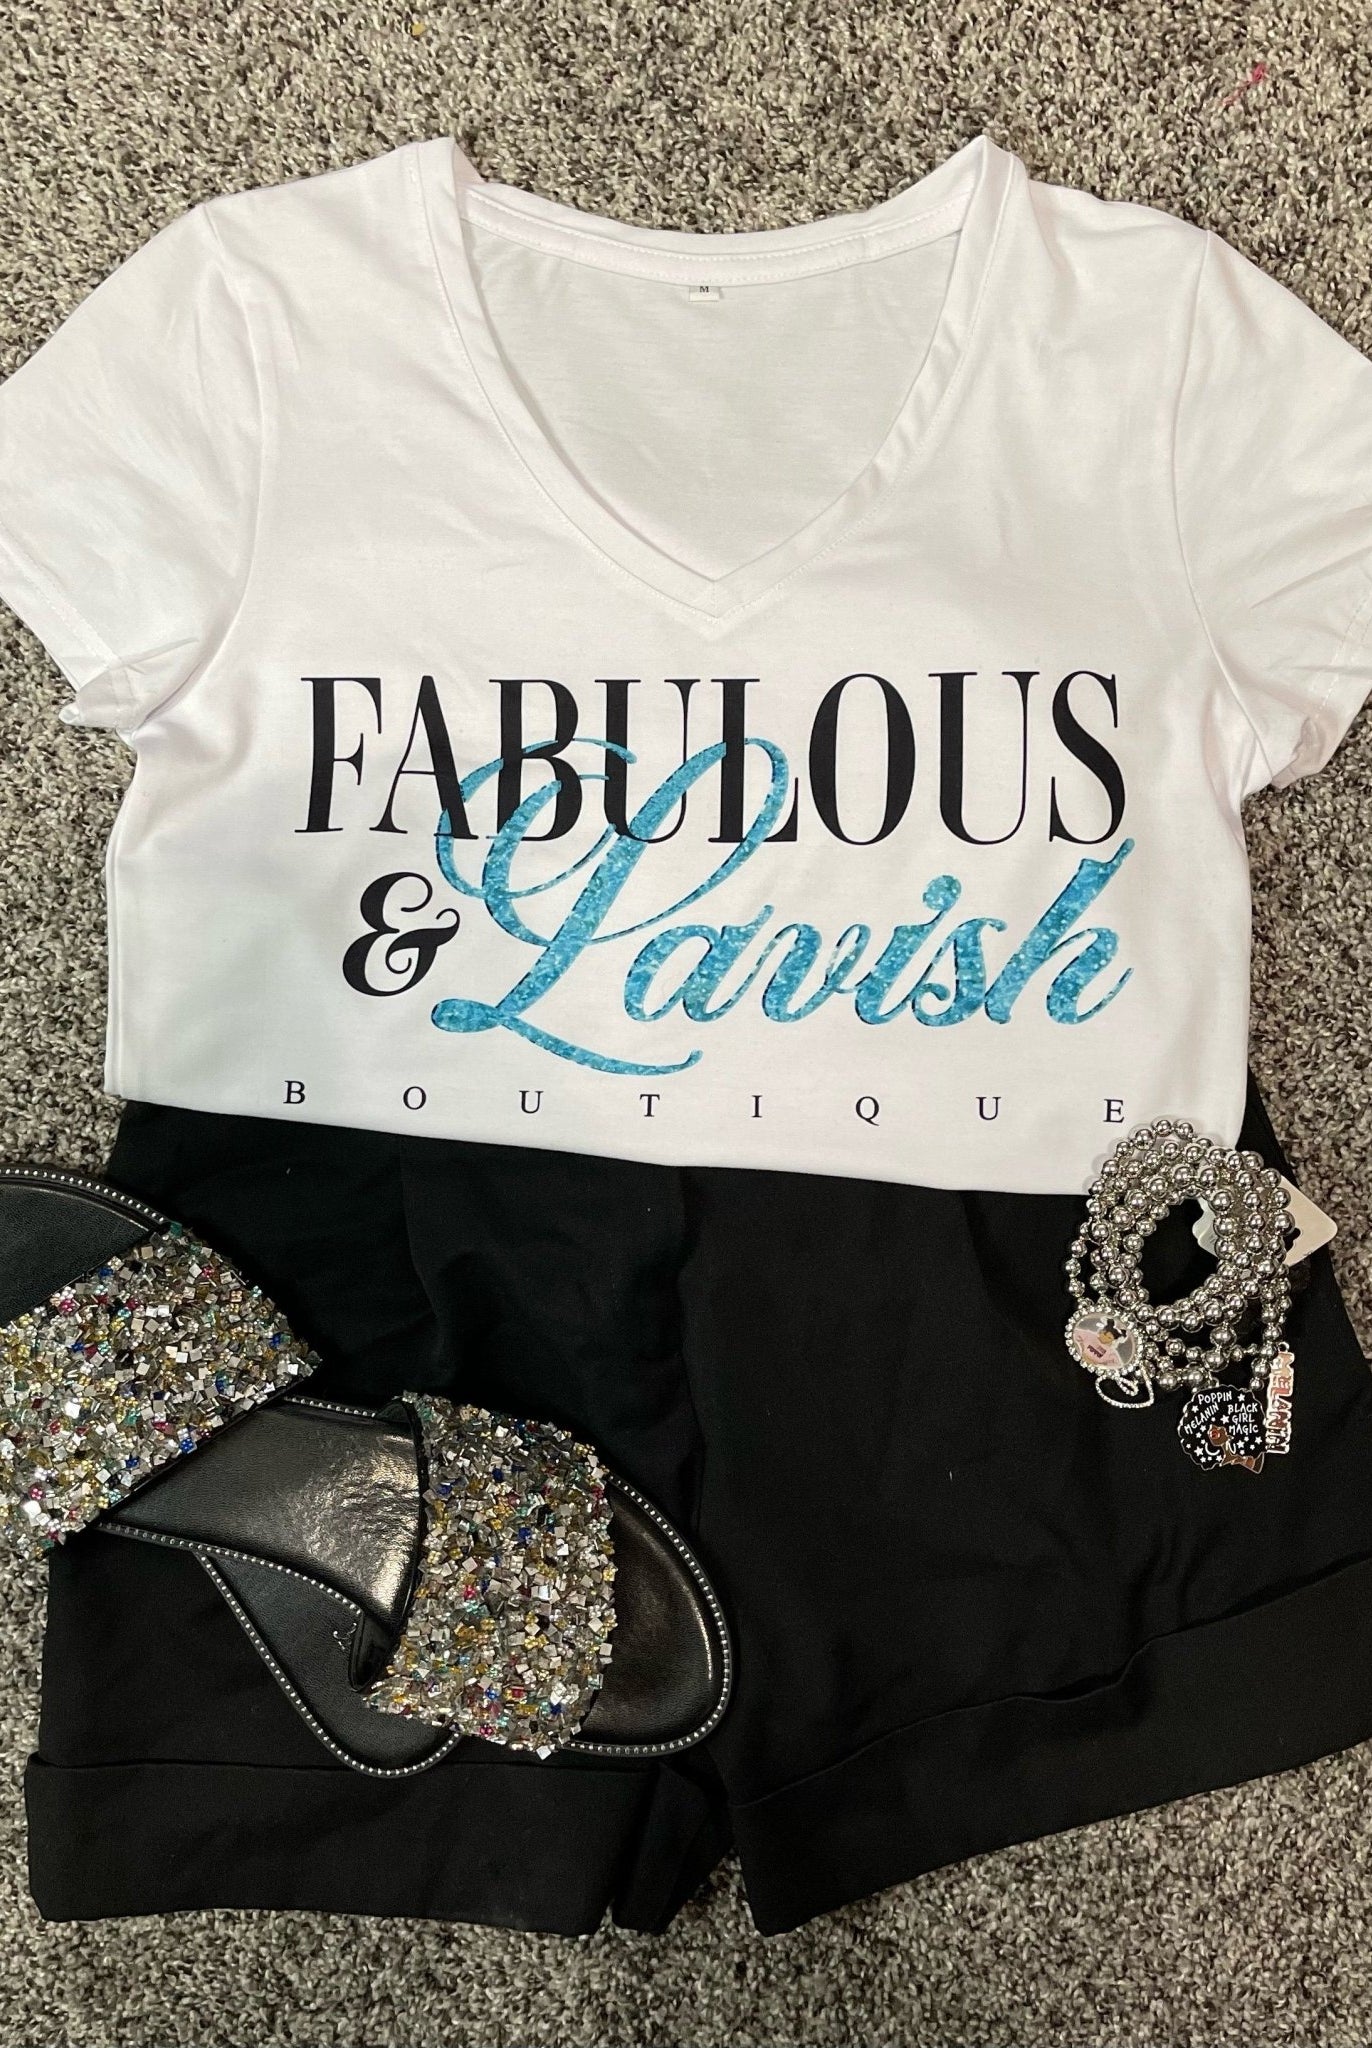 
  
  Fab and Lav Tee: Trendy Fashion for You
  
